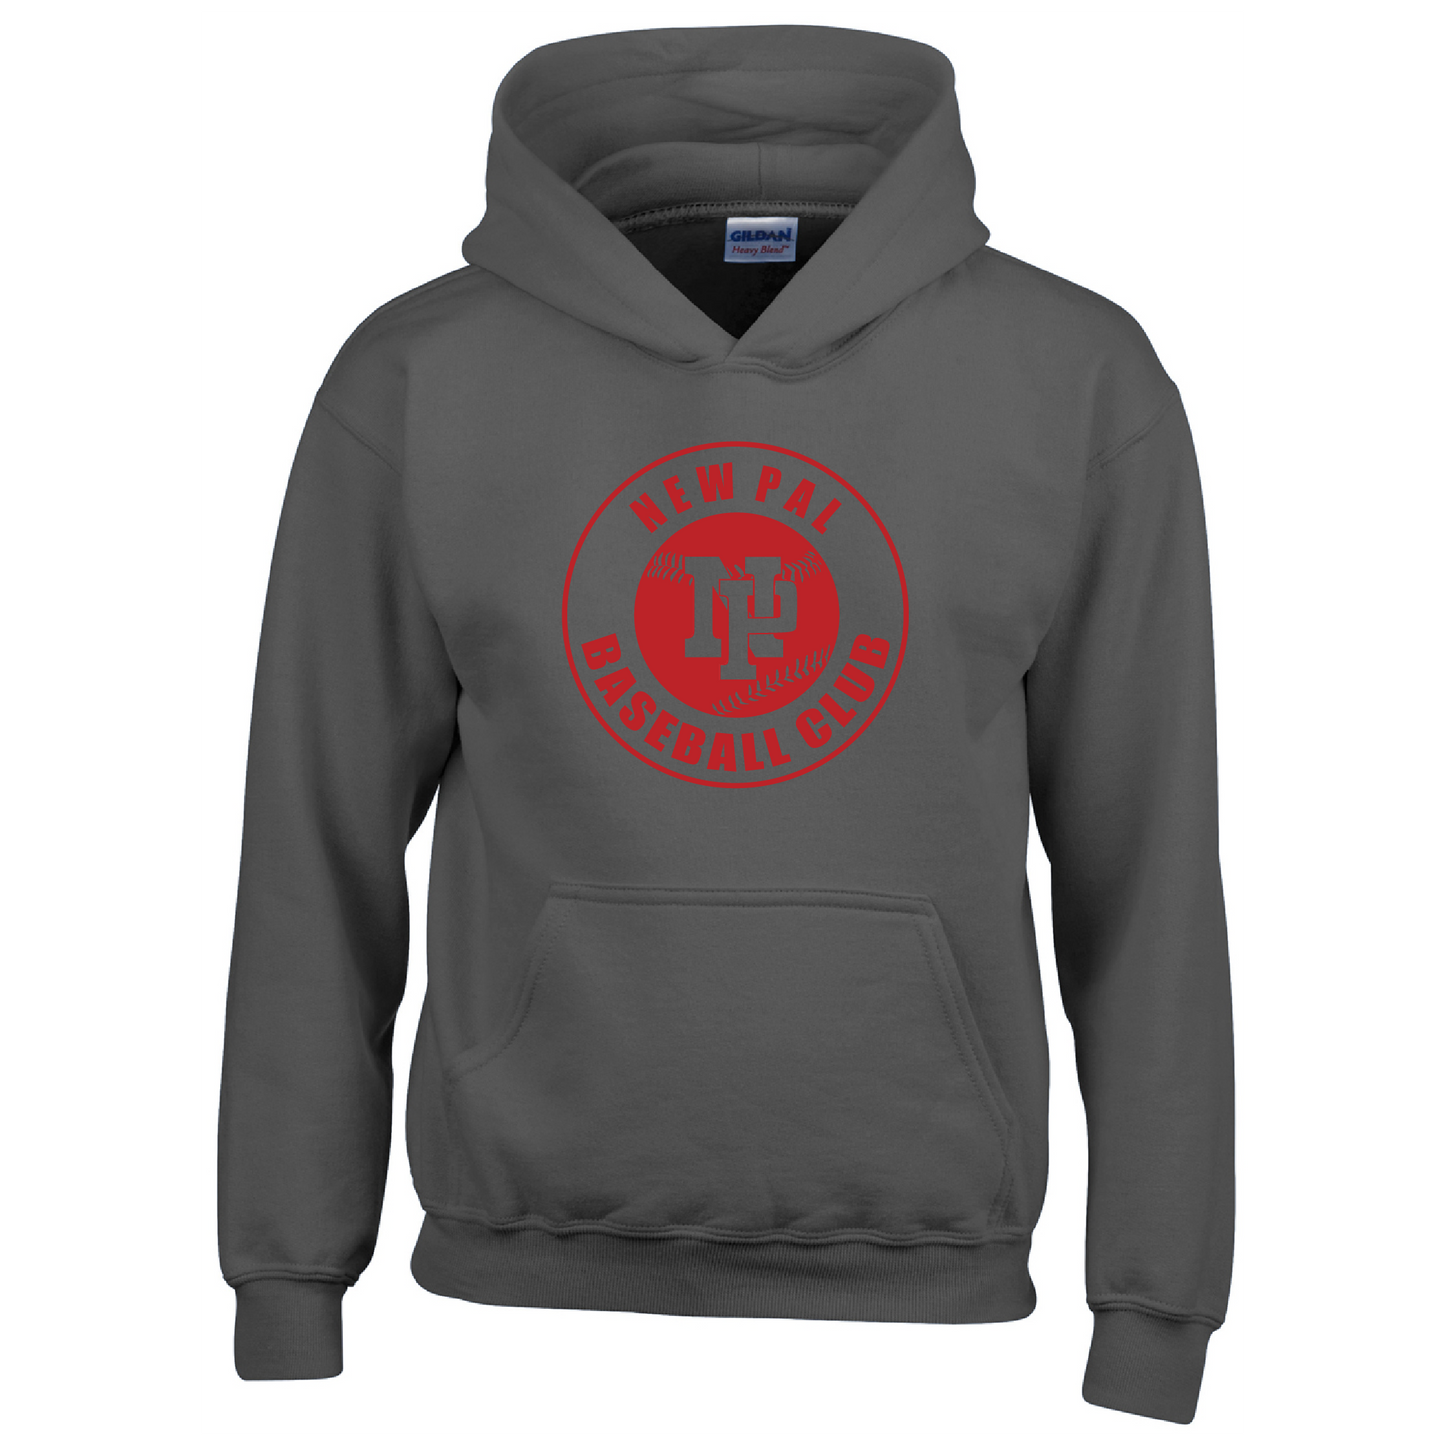 Unisex Adult/Youth Performance Hoodie - NP Baseball Club (red logo)